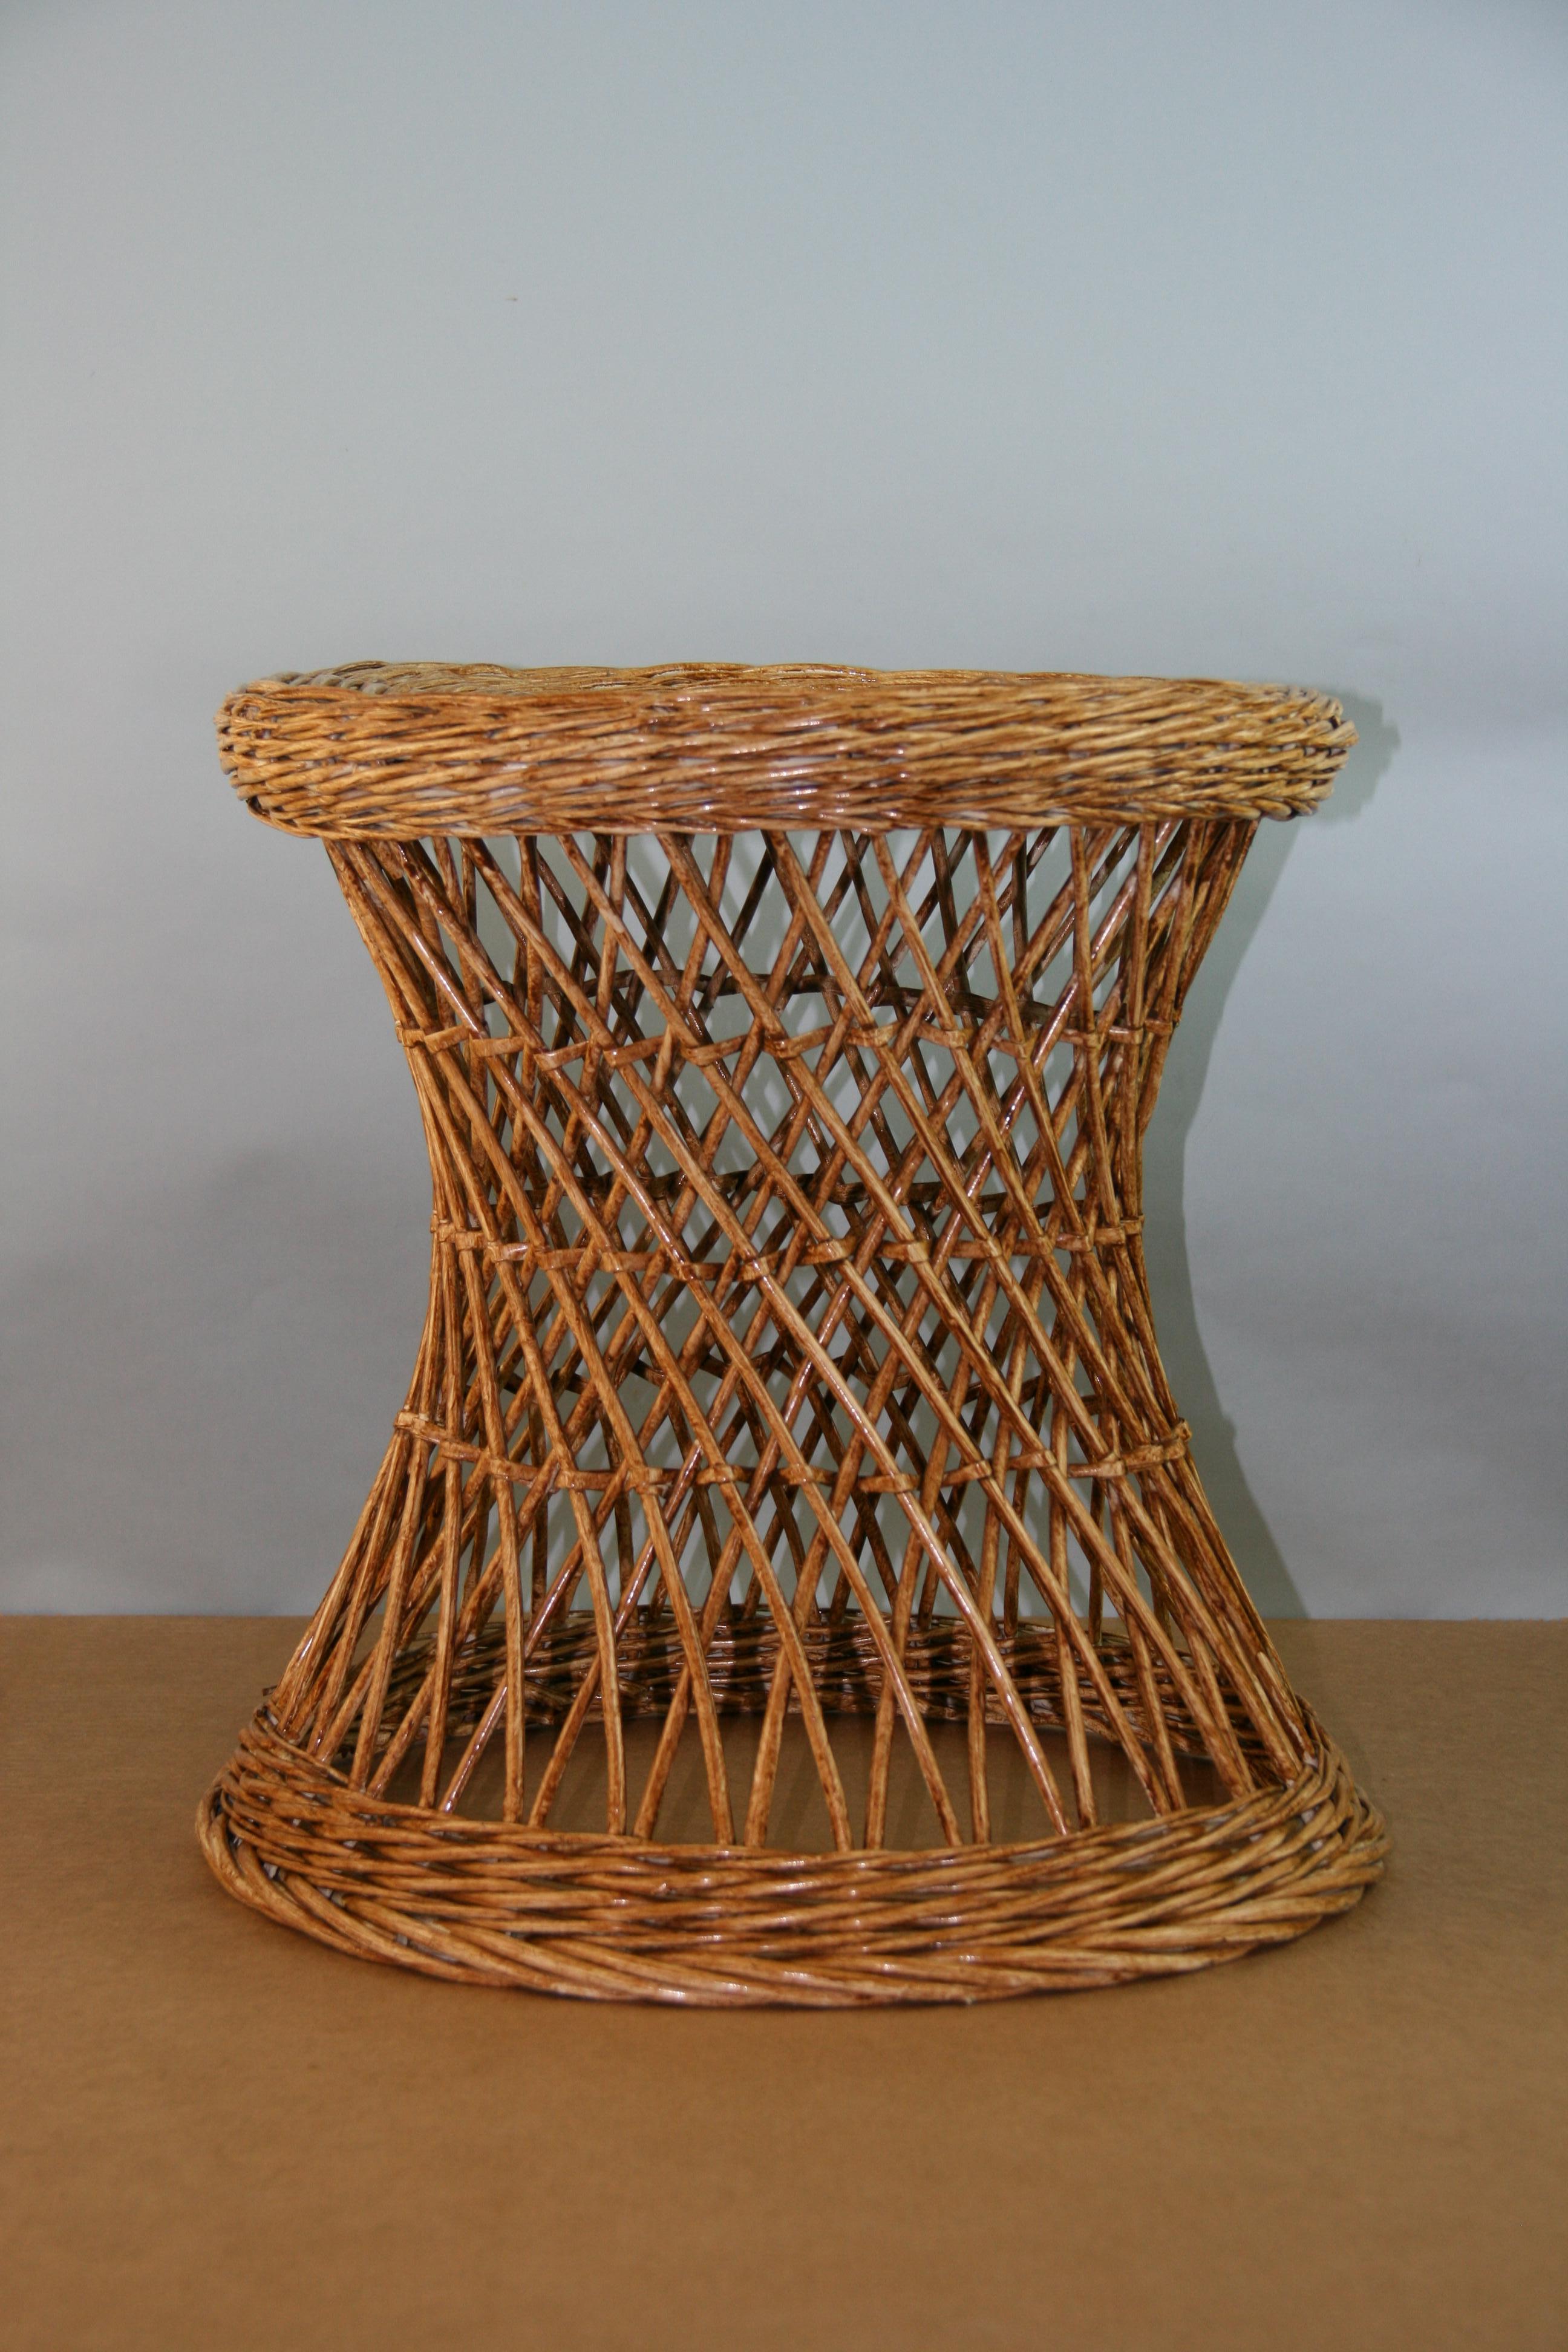 3-567 A vintage midcentury wicker stool  /side table with hourglass design.